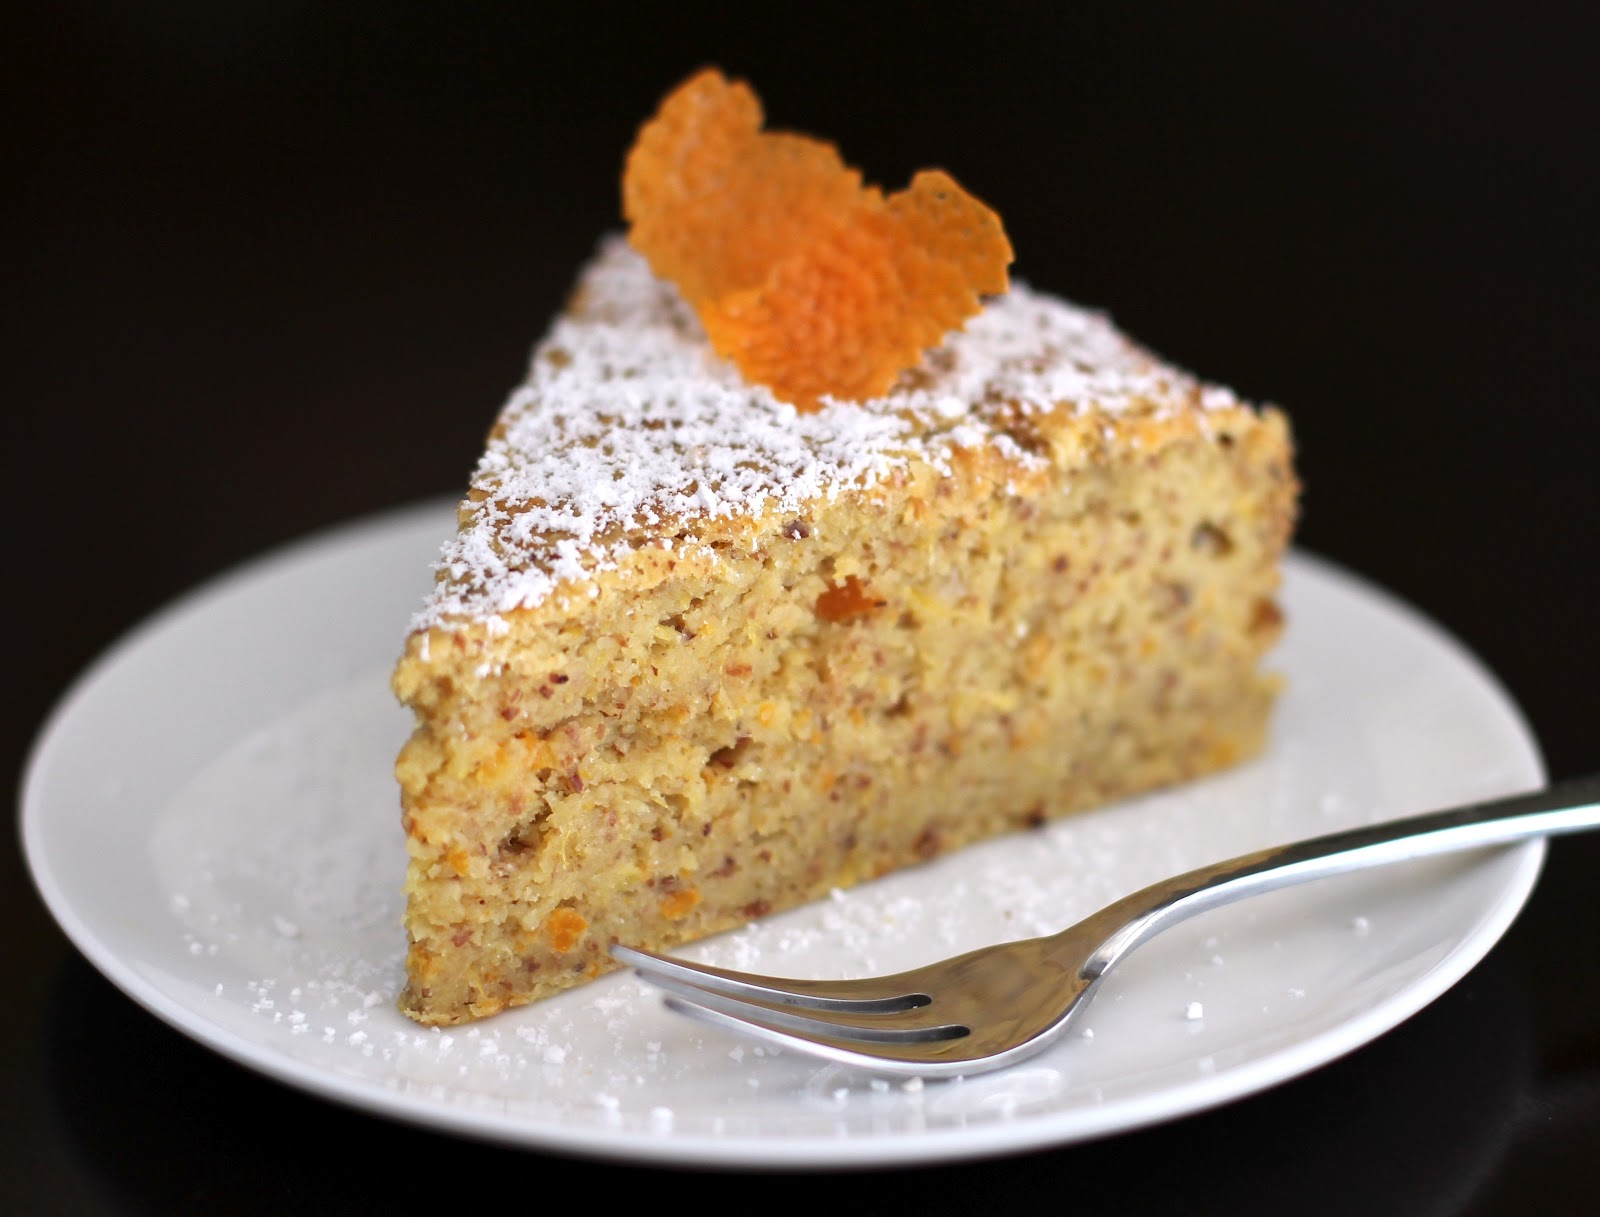 20 Healthy Desserts You Can Eat For Breakfast: 15) Healthy Whole Orange Almond Cake recipe (refined sugar free, high protein, high fiber, gluten free) - Healthy Dessert Recipes at Desserts with Benefits